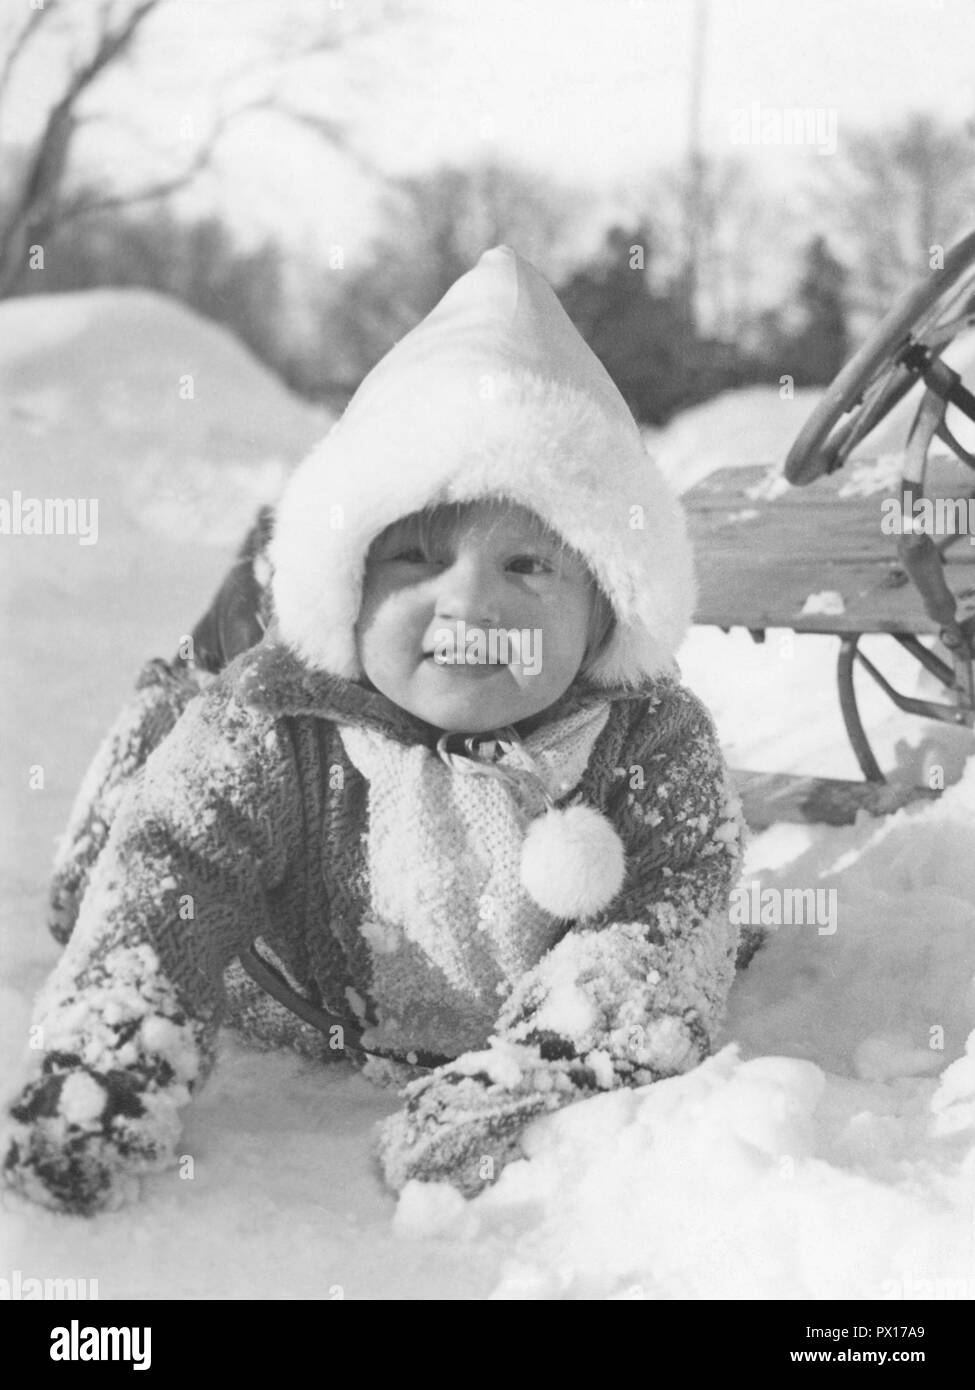 Winter in the 1940s. A child has fallen from the sledge but doesn't seem to mind. Sweden 1940s. Stock Photo